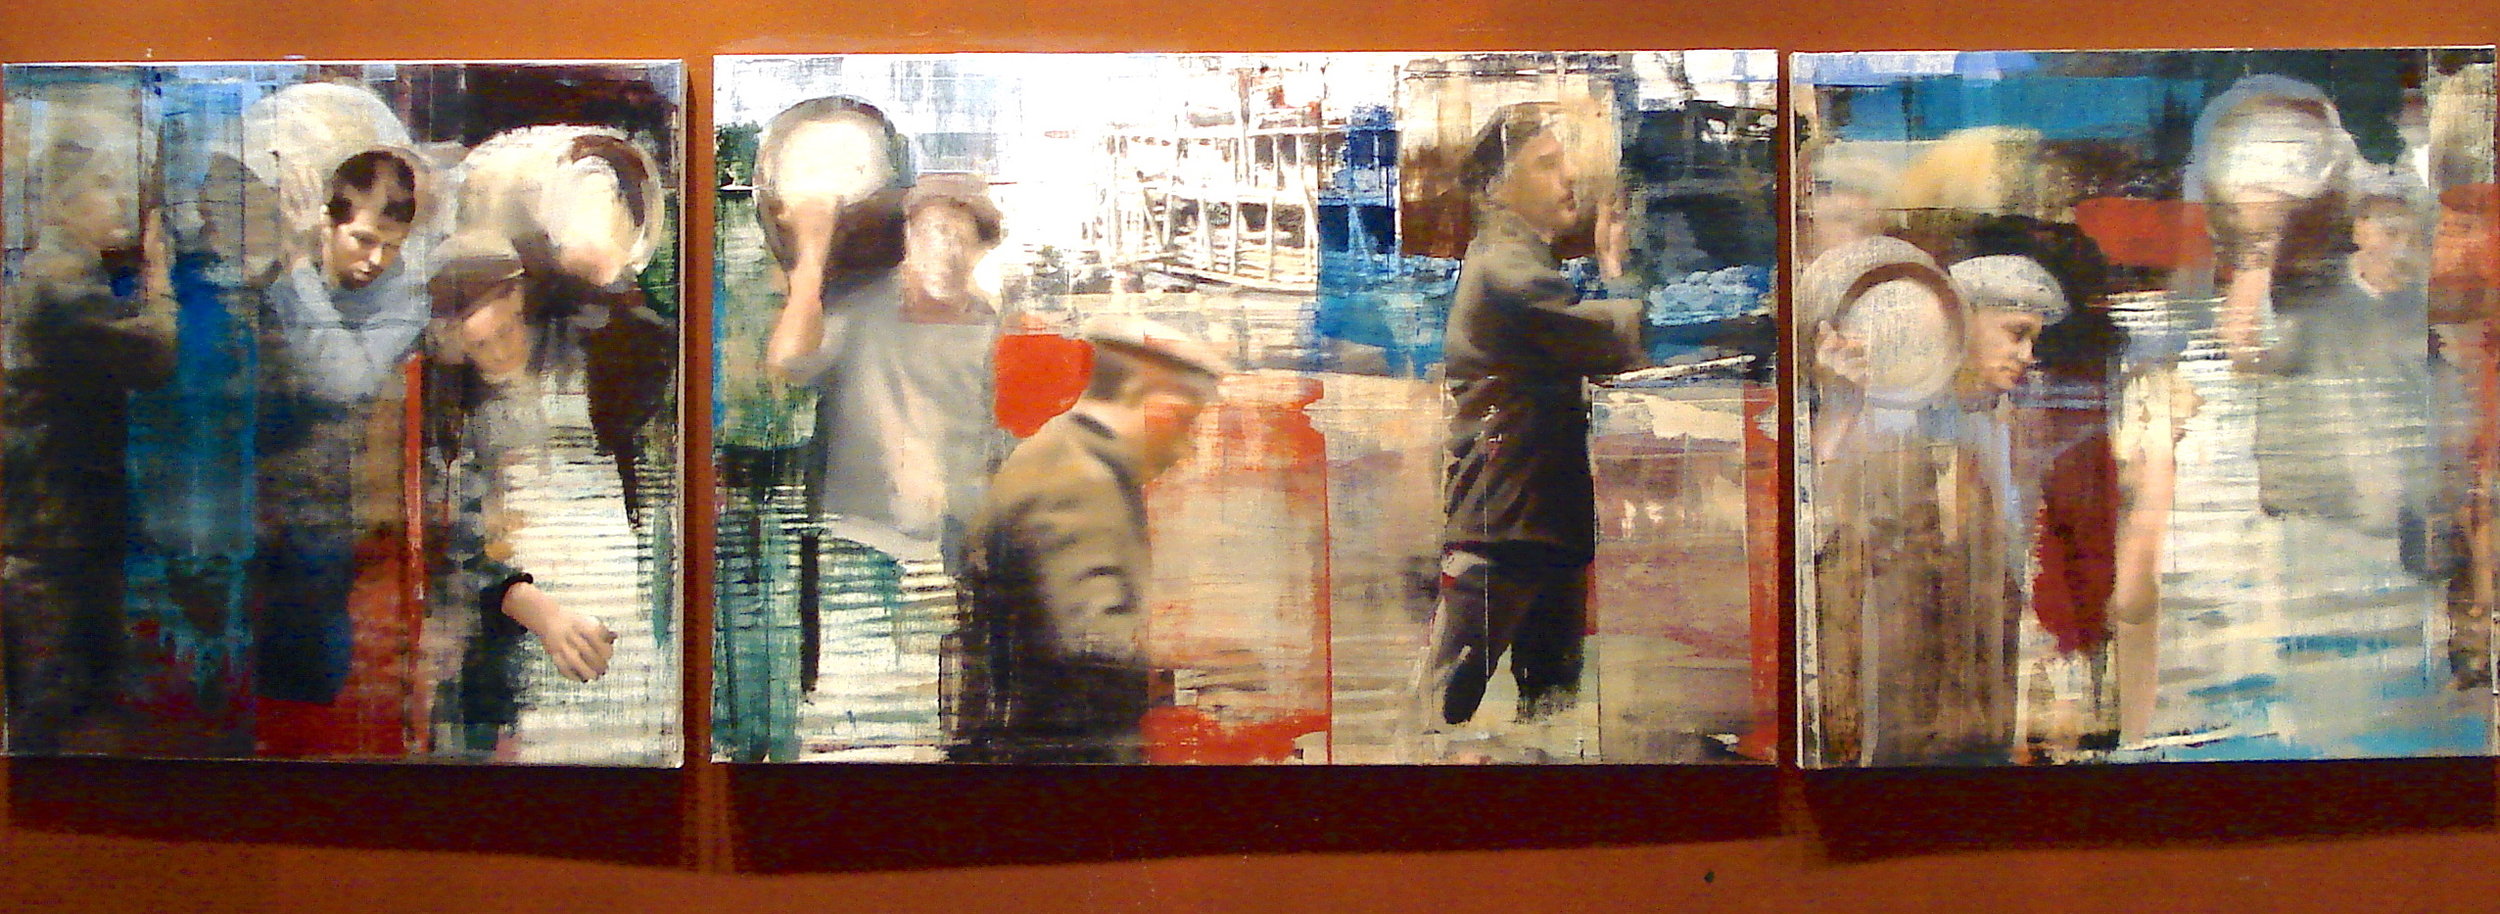 20. Moving the Barrels, Oil on Linen on Panel, 2013, 48” X 168”